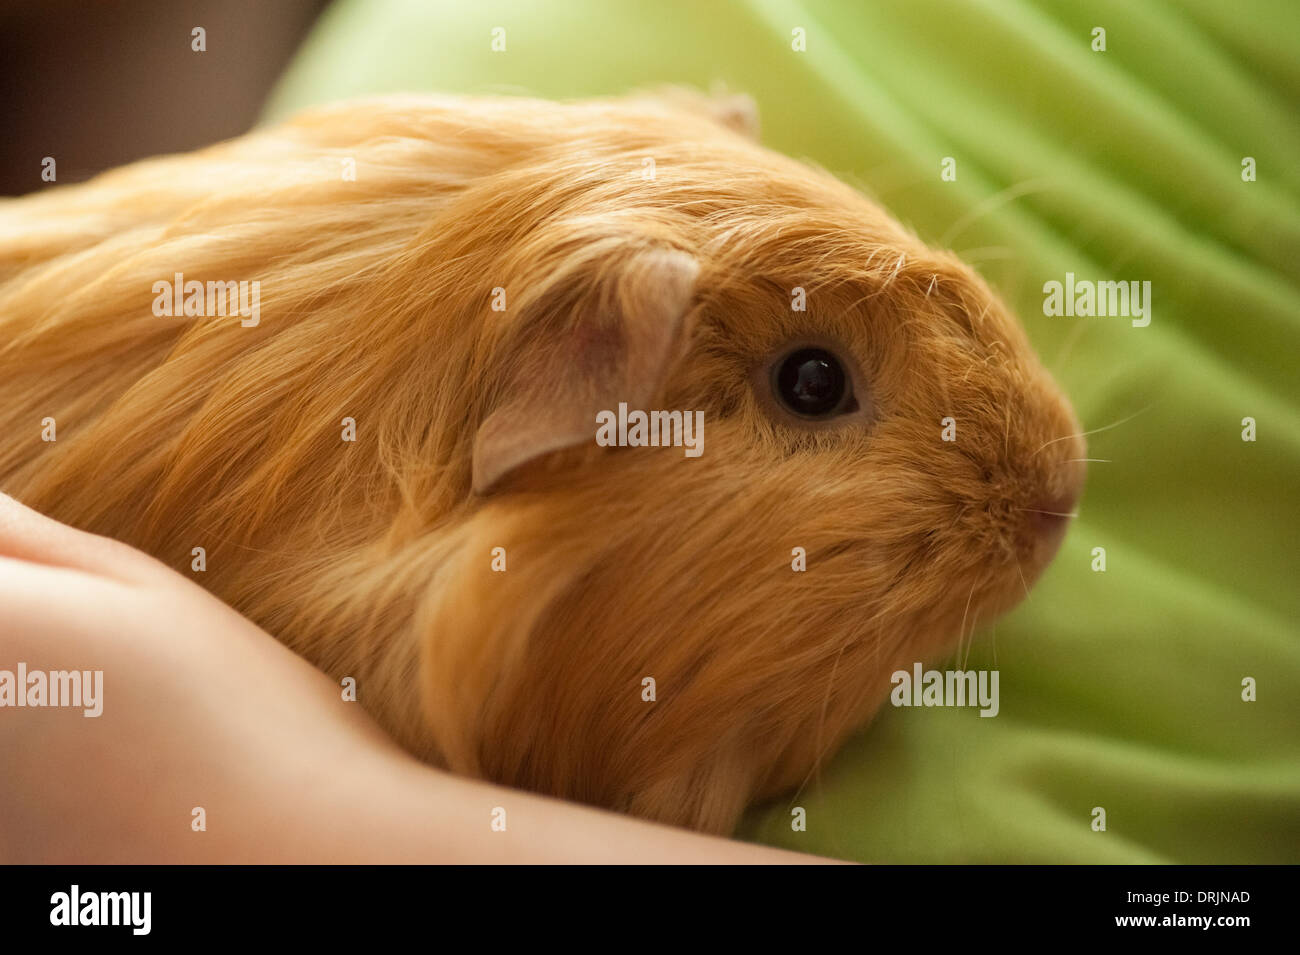 Ginger Long Haired Guinea Pig Sitting On Childs Lap Stock Photo